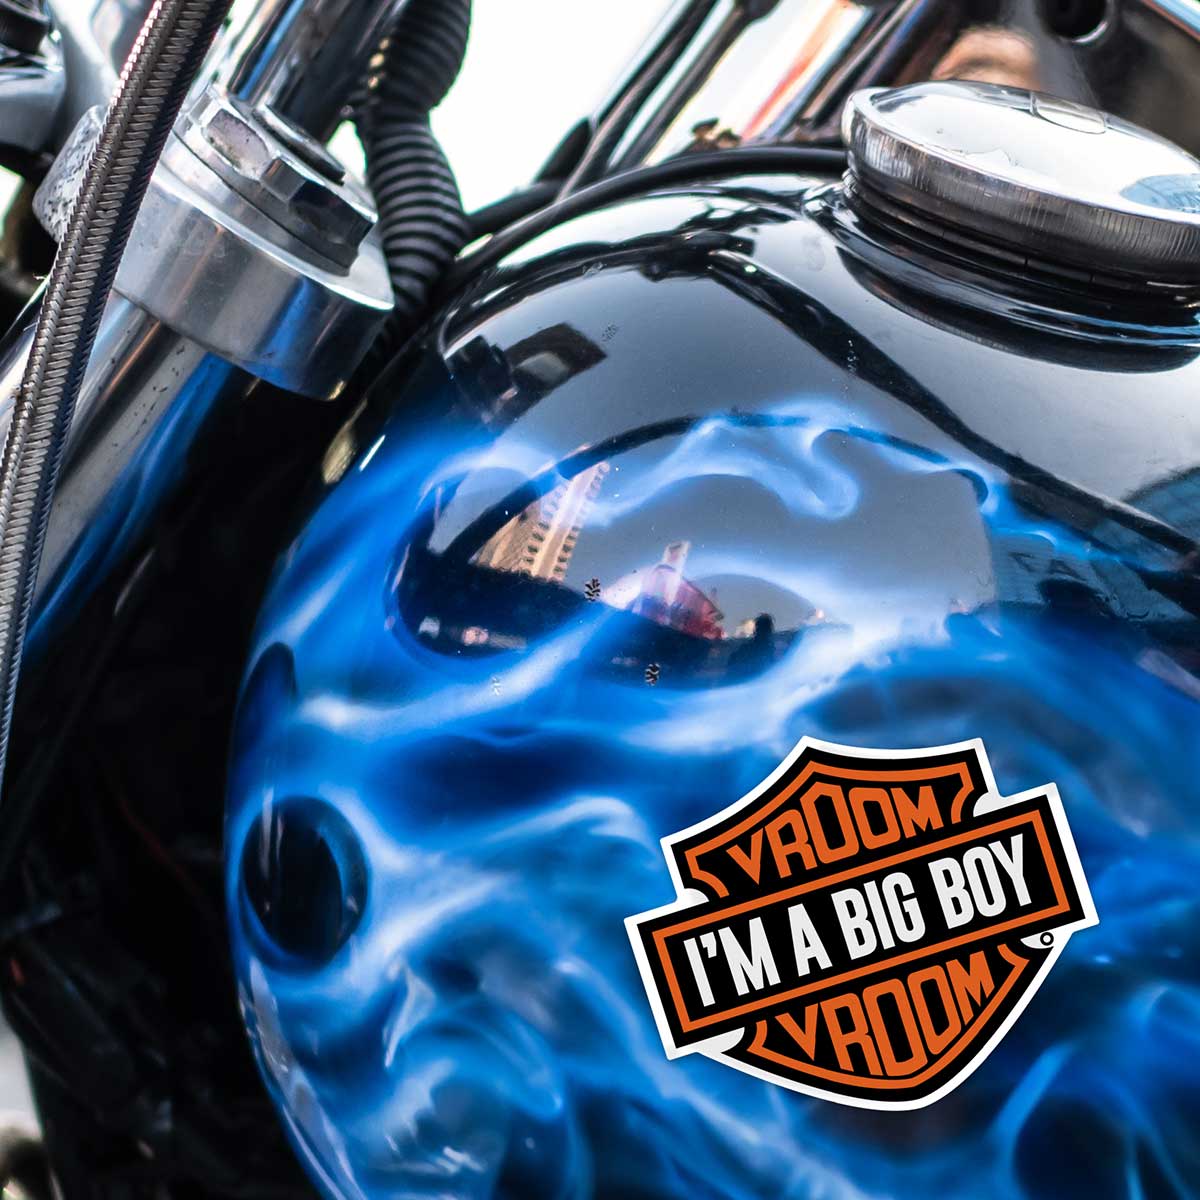 Bring the noise. Just in time for the start of the straight pipe season, be in hog heaven with these magnets #vroomvroom 🎁 ostore: The art of Frank Orlando store.orlandomedia.co #harley #hogheaven #HarleyDavidson #HarleyArt #FreedomMachines #RideWithUs #MotorcycleMajesty